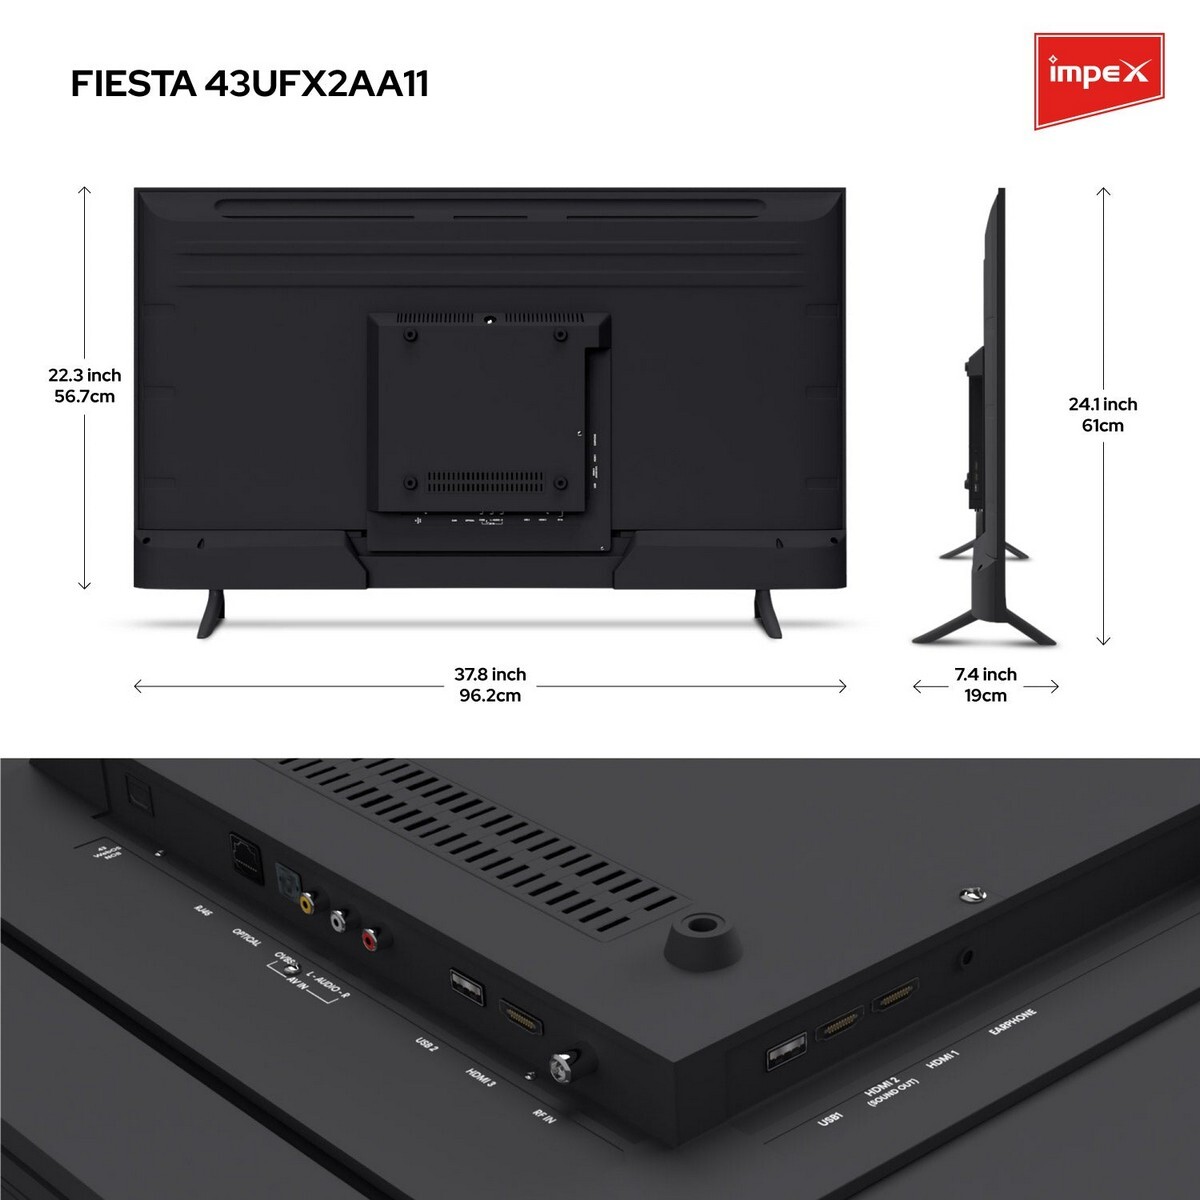 Impex LED TV FIESTA 43UFX2AA11 43 Inches